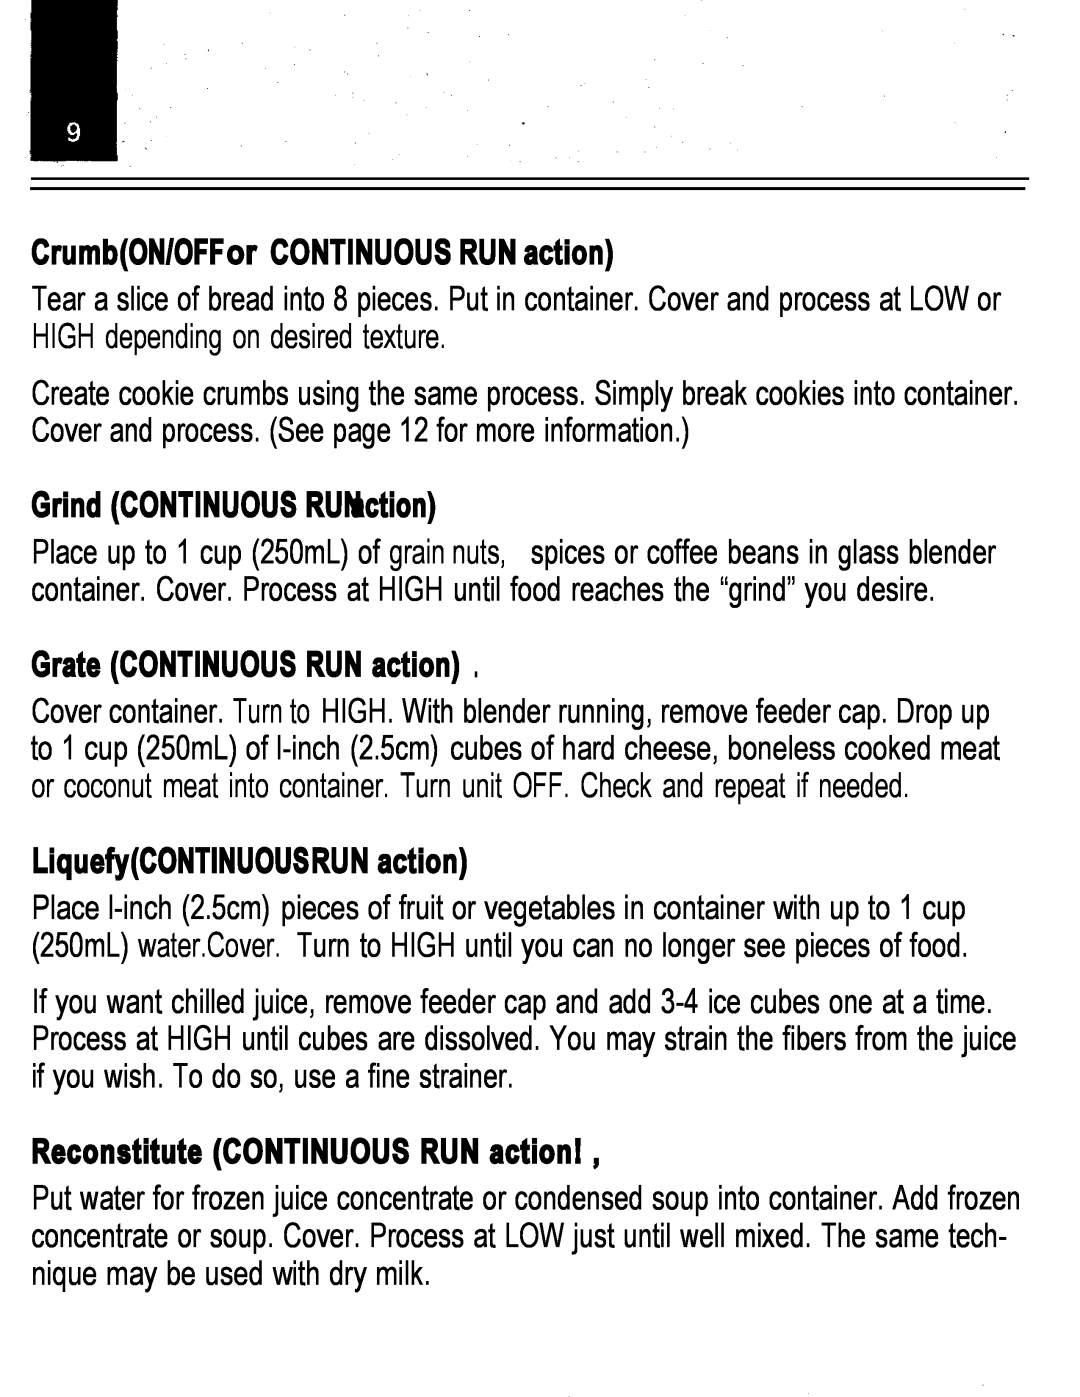 Oster IZER BLENDER/LIQUEFIER CrumbON/OFFor CONTINUOUS RUN action, Grind CONTINUOUS RUNaction, Grate CONTINUOUS RUN action 